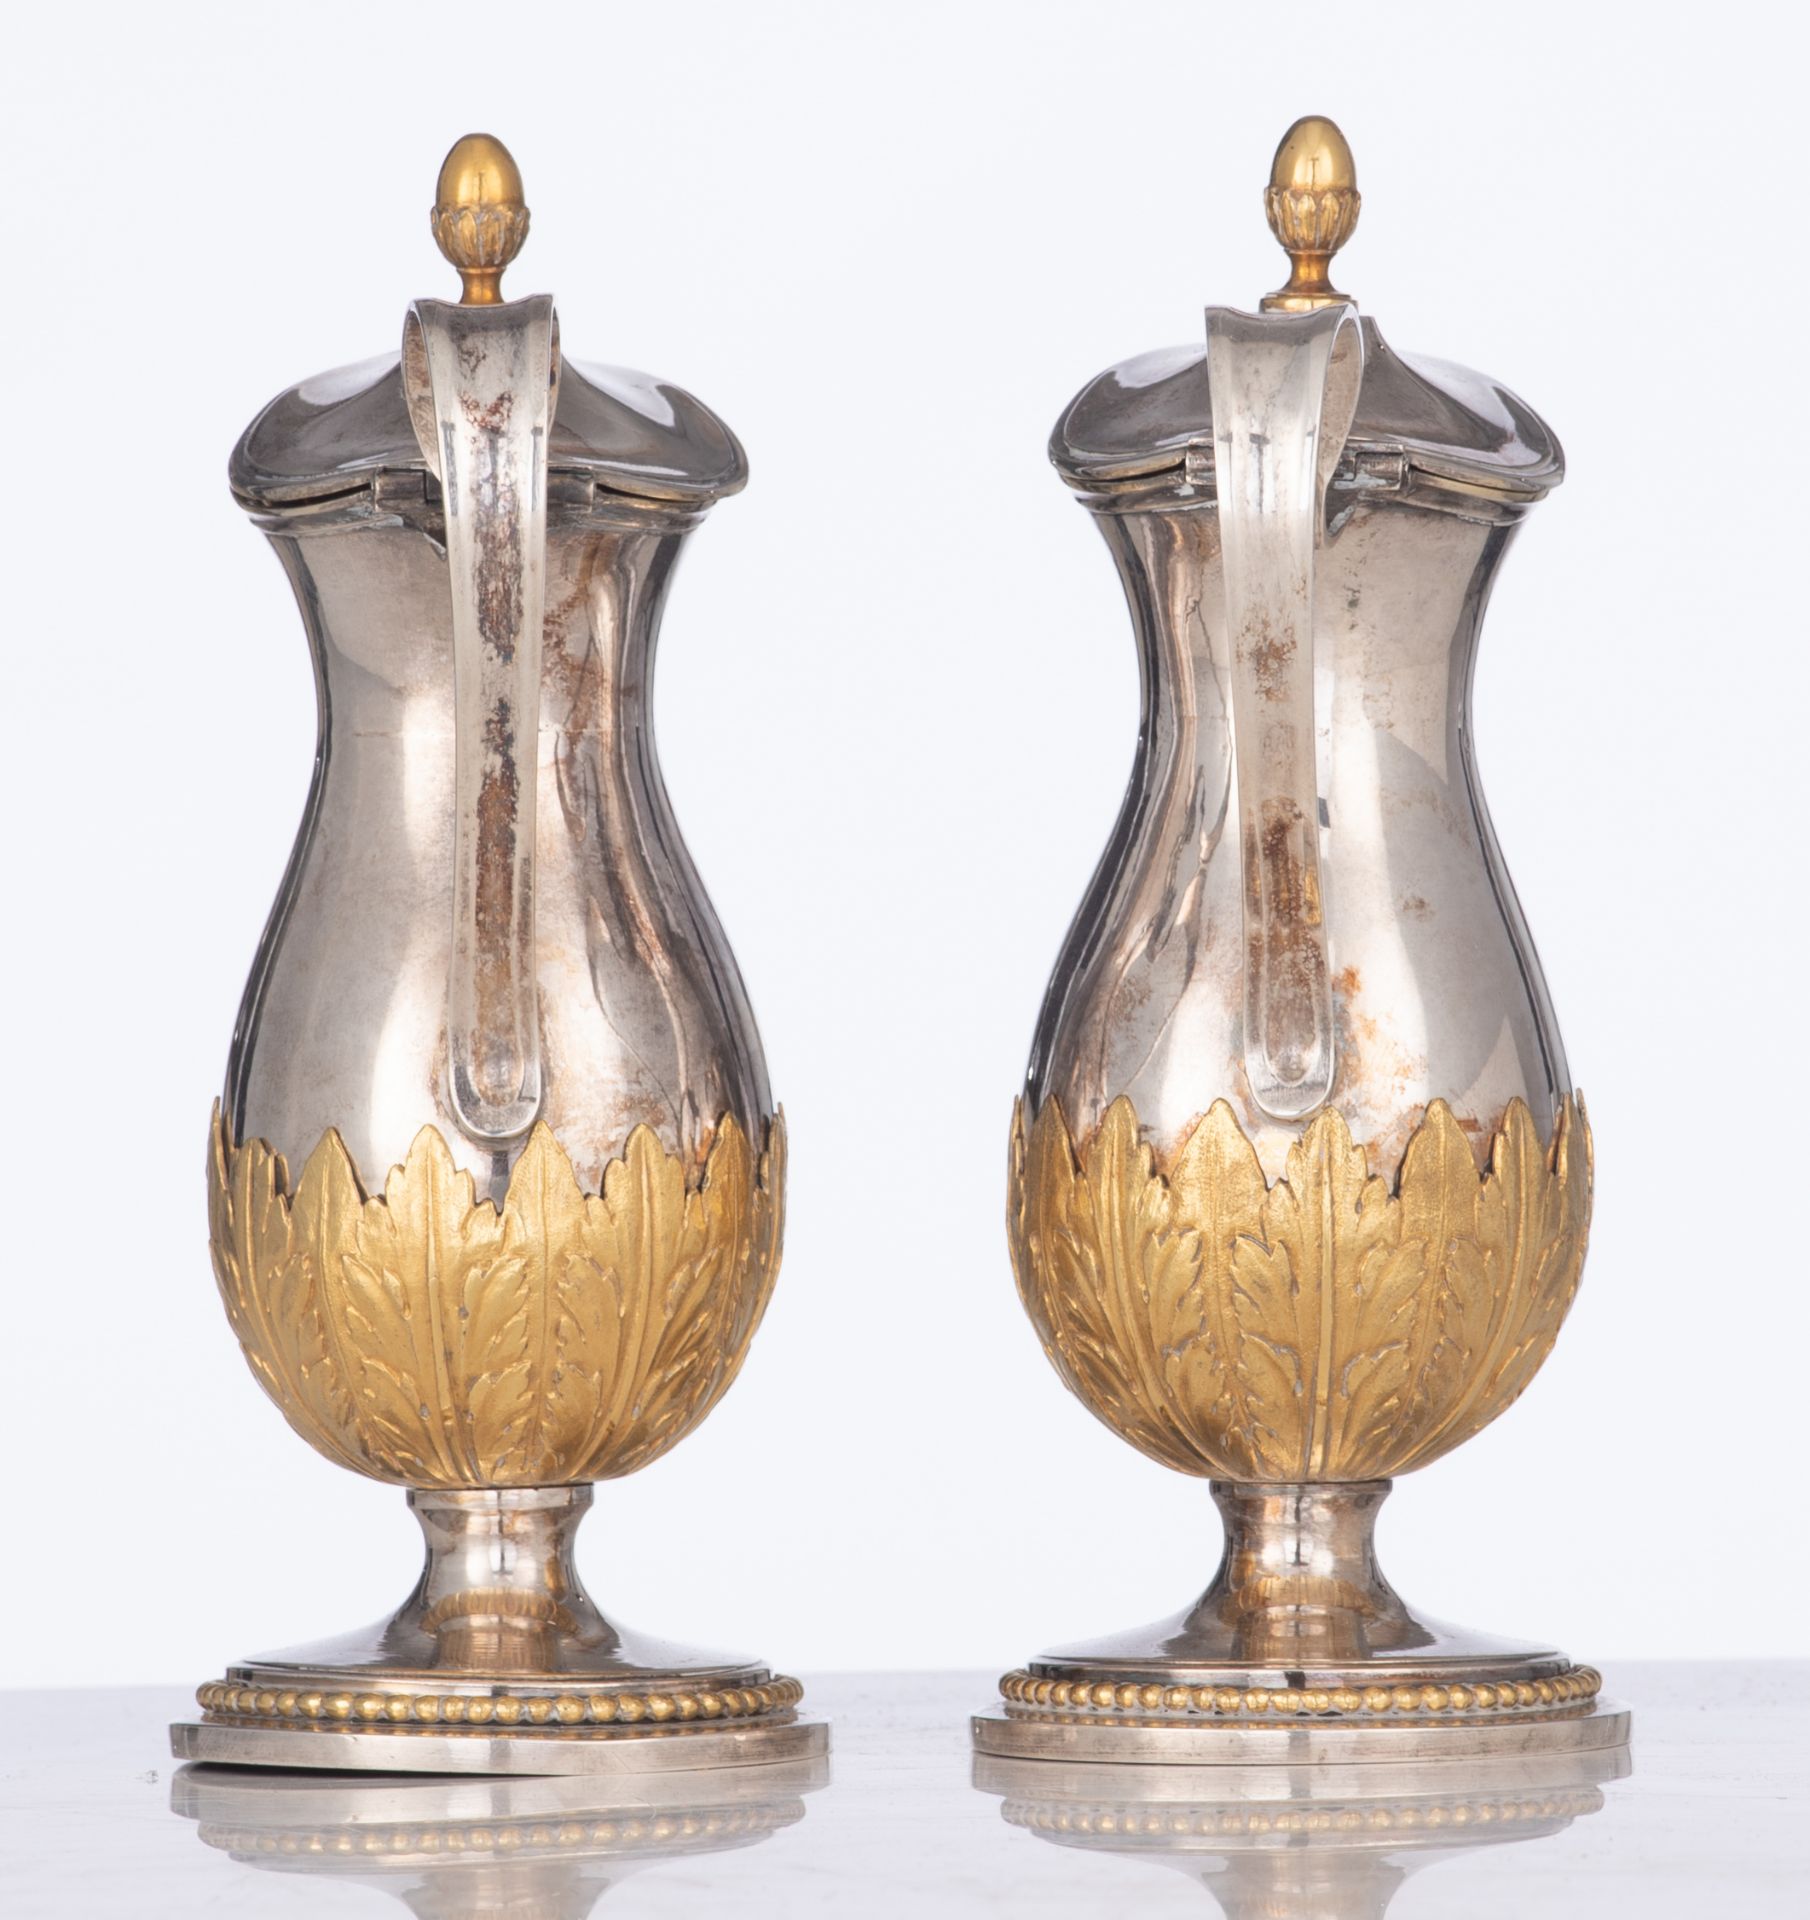 A pair of 18thC silver and vermeil jugs, no visible hallmarks, H 15,5 cm, weight: ca. 541 g - Image 3 of 12